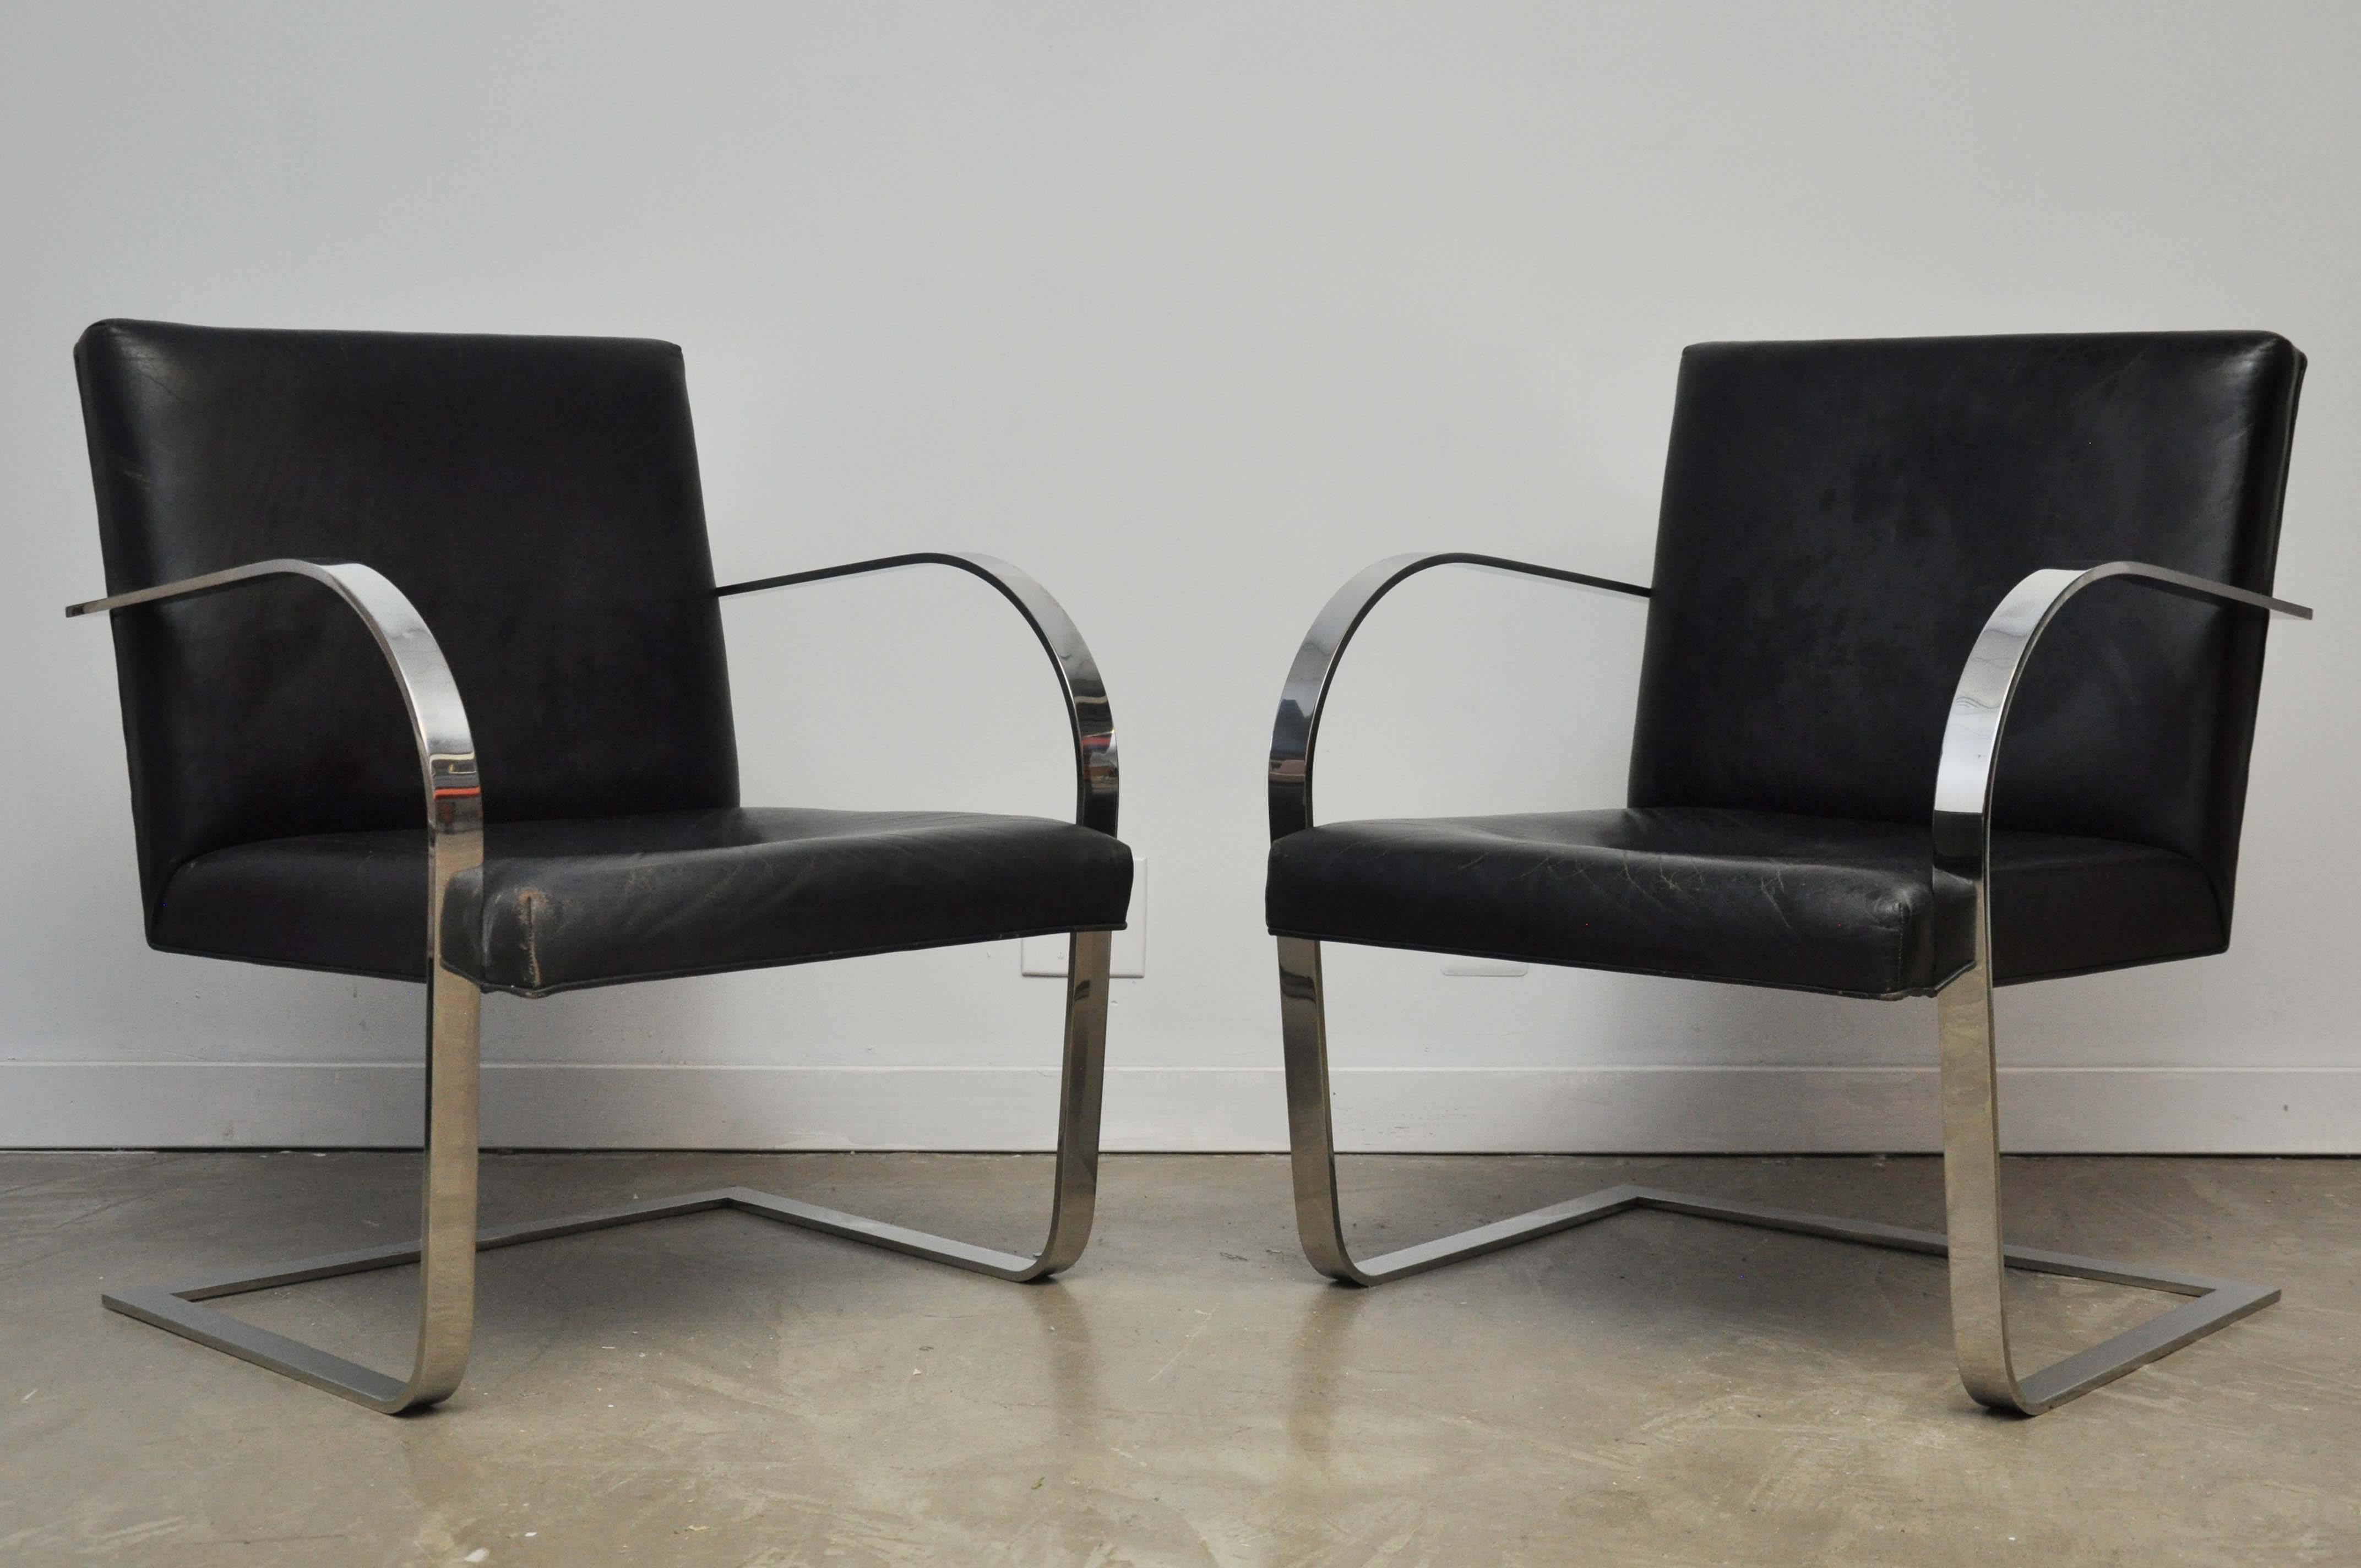 Rare Brno lounge chairs by produced by Brueton. Original black leather with nice patina. Polished flat bar frames.